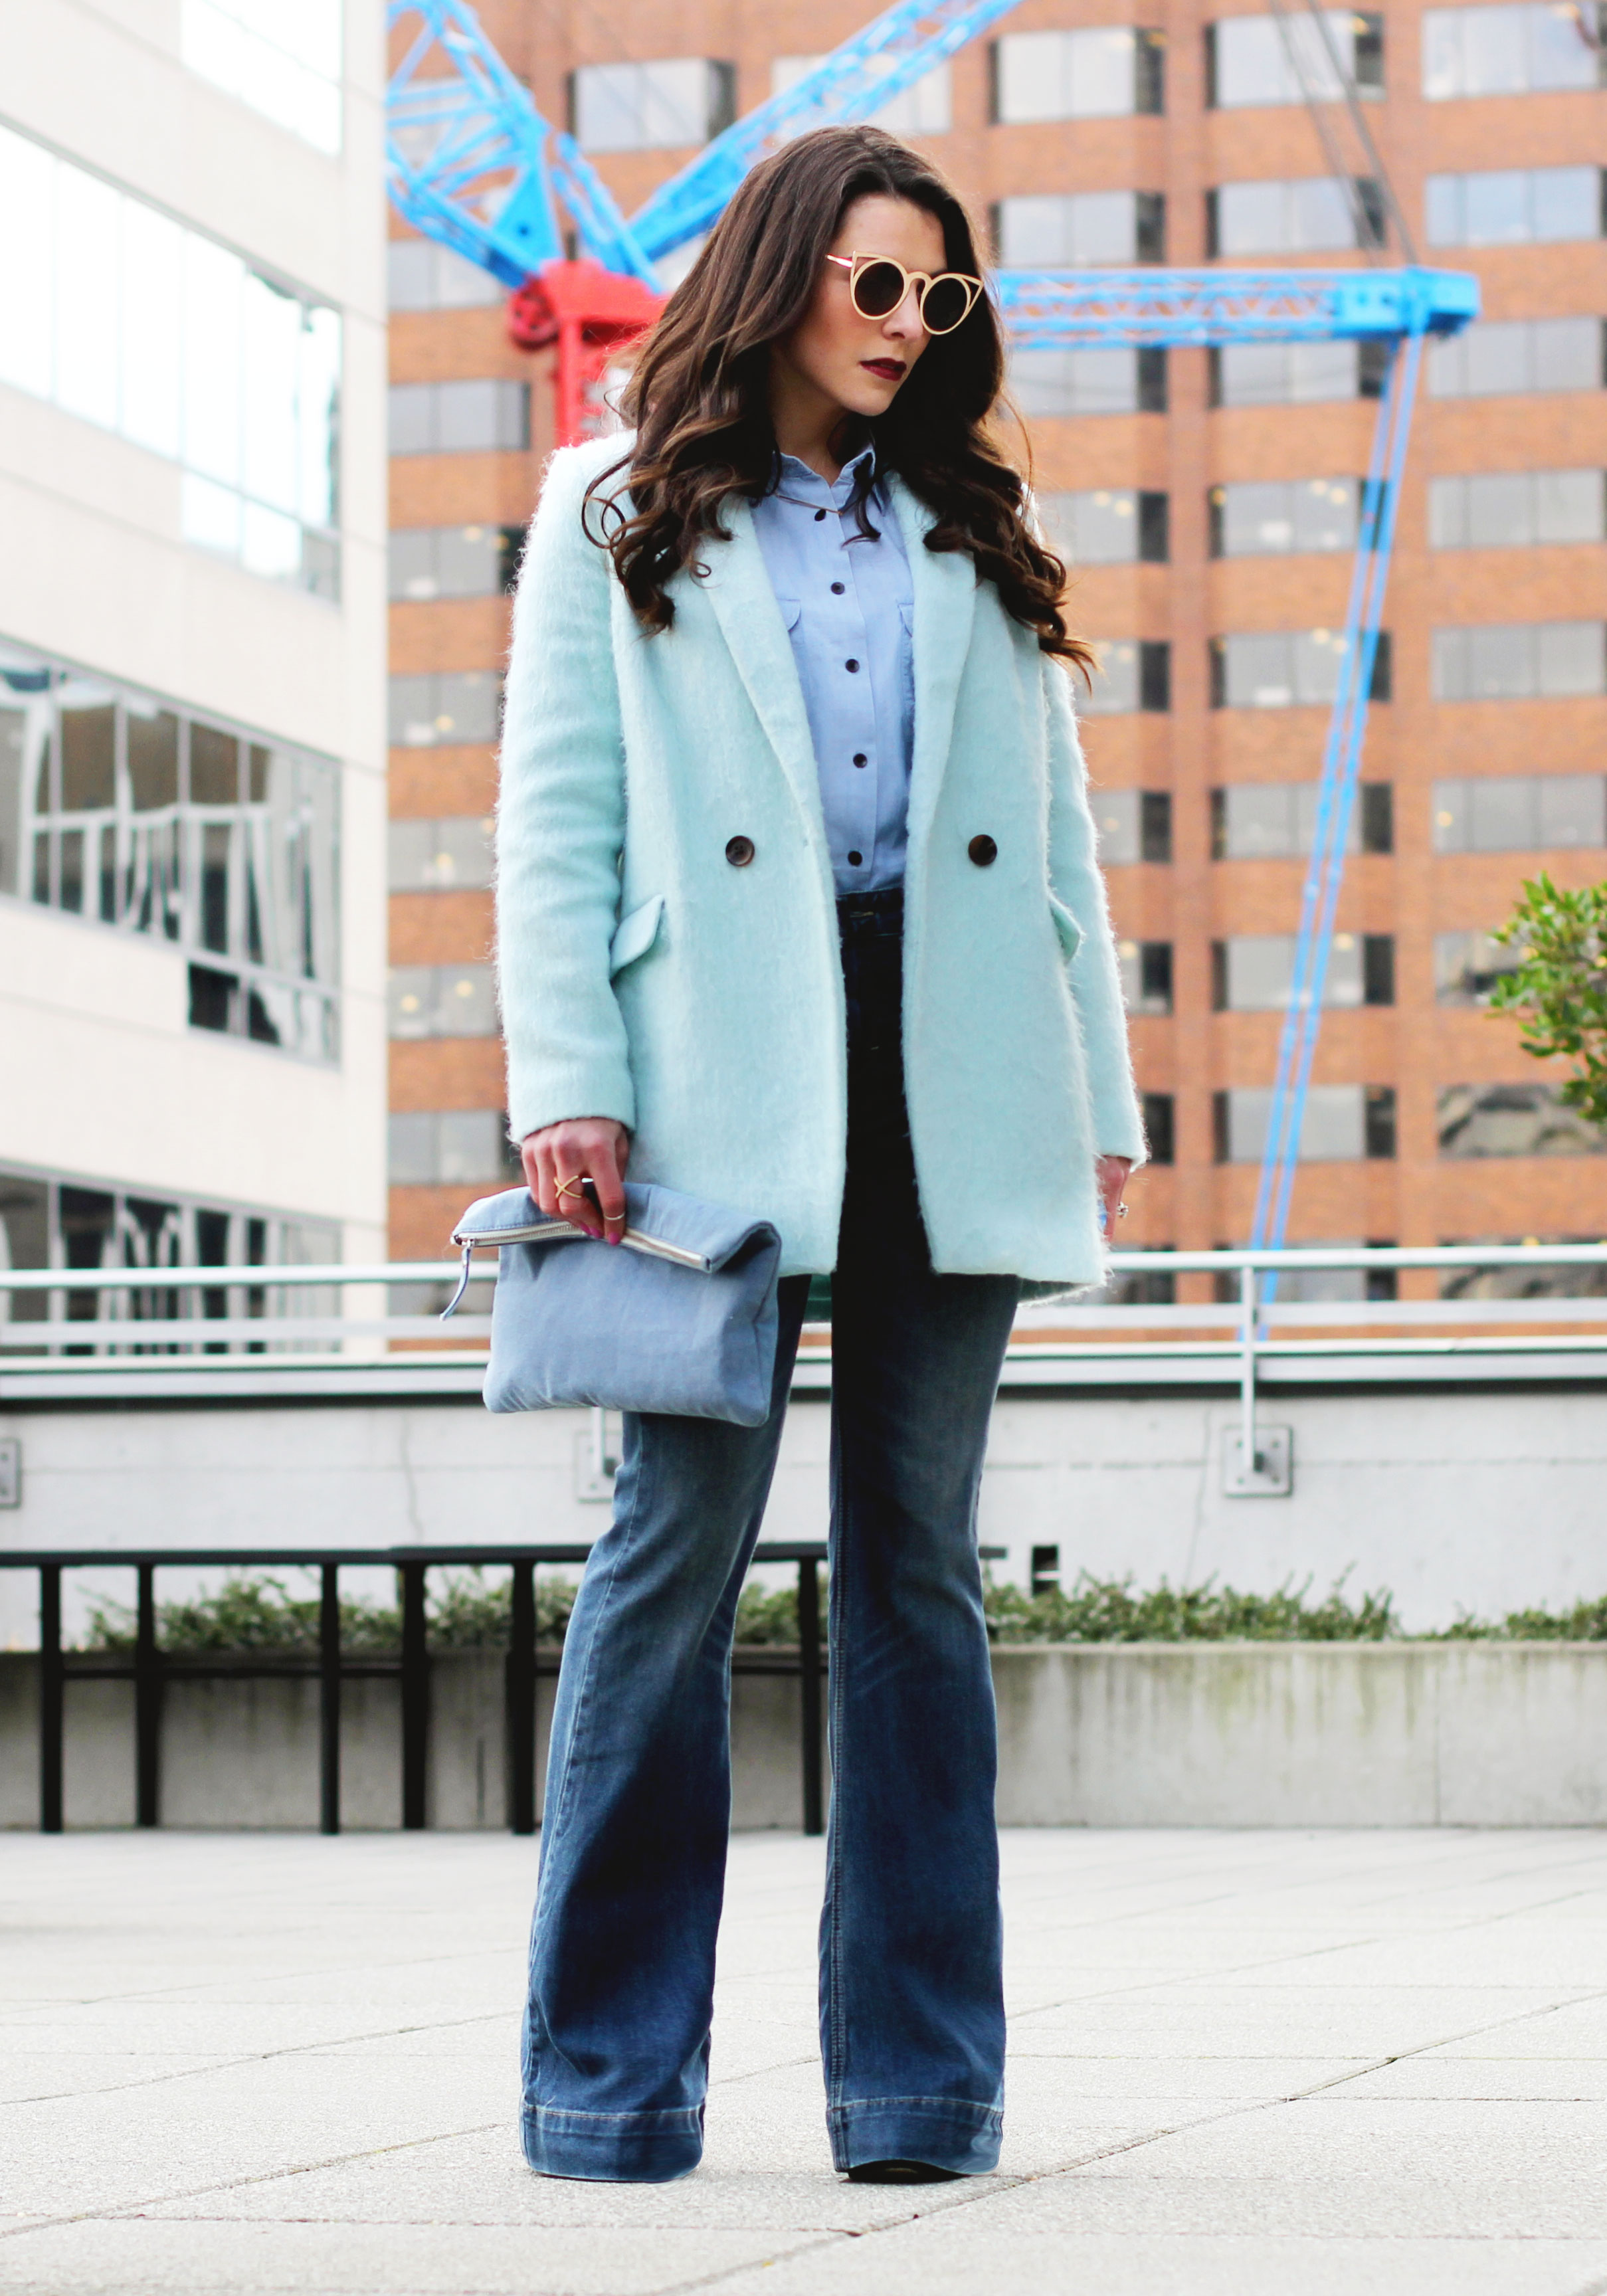 Winter Outfit, All Denim Canadian Tuxedo, Flare Jeans, $10 Gold Cat Eye Sunglasses, Mint Green Coat